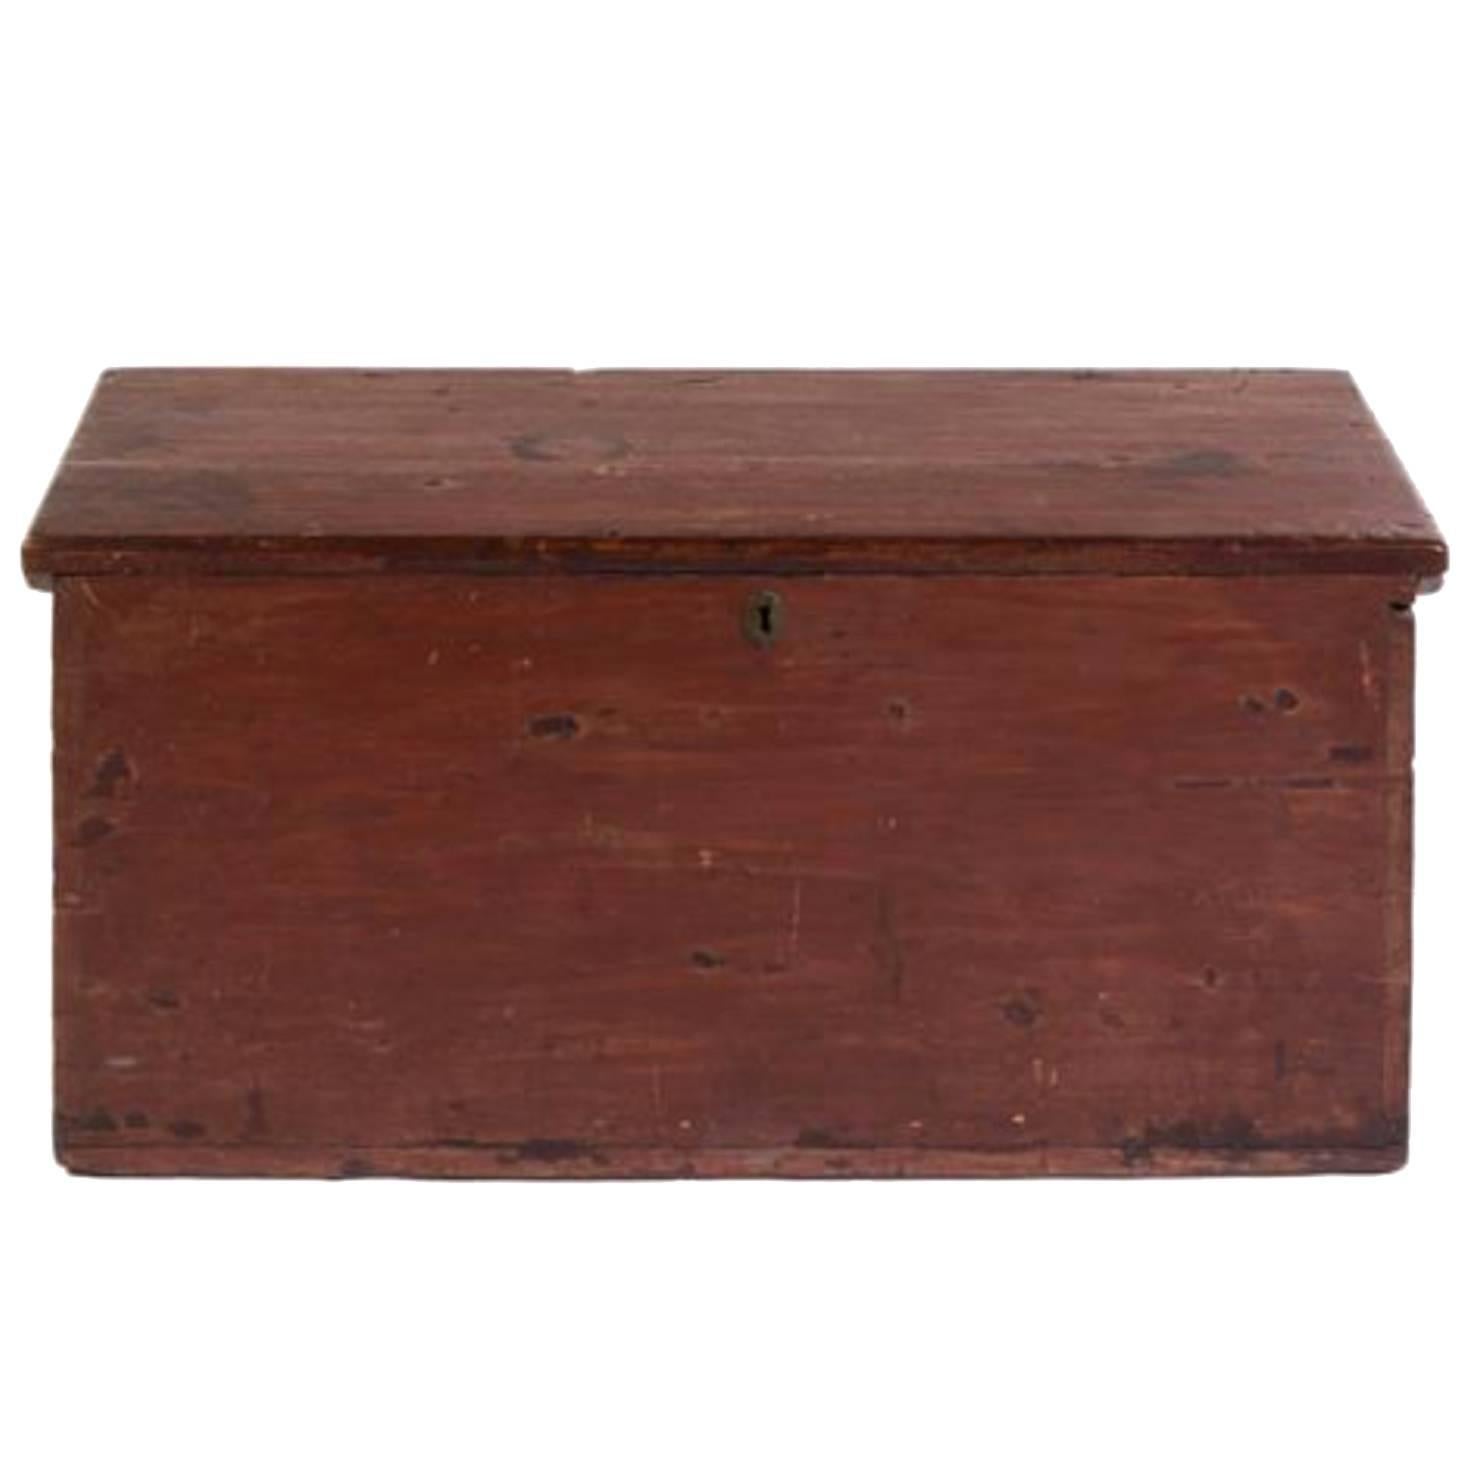 Handsome 19th Century American Painted Trunk with Lovely Worn Painted Finish